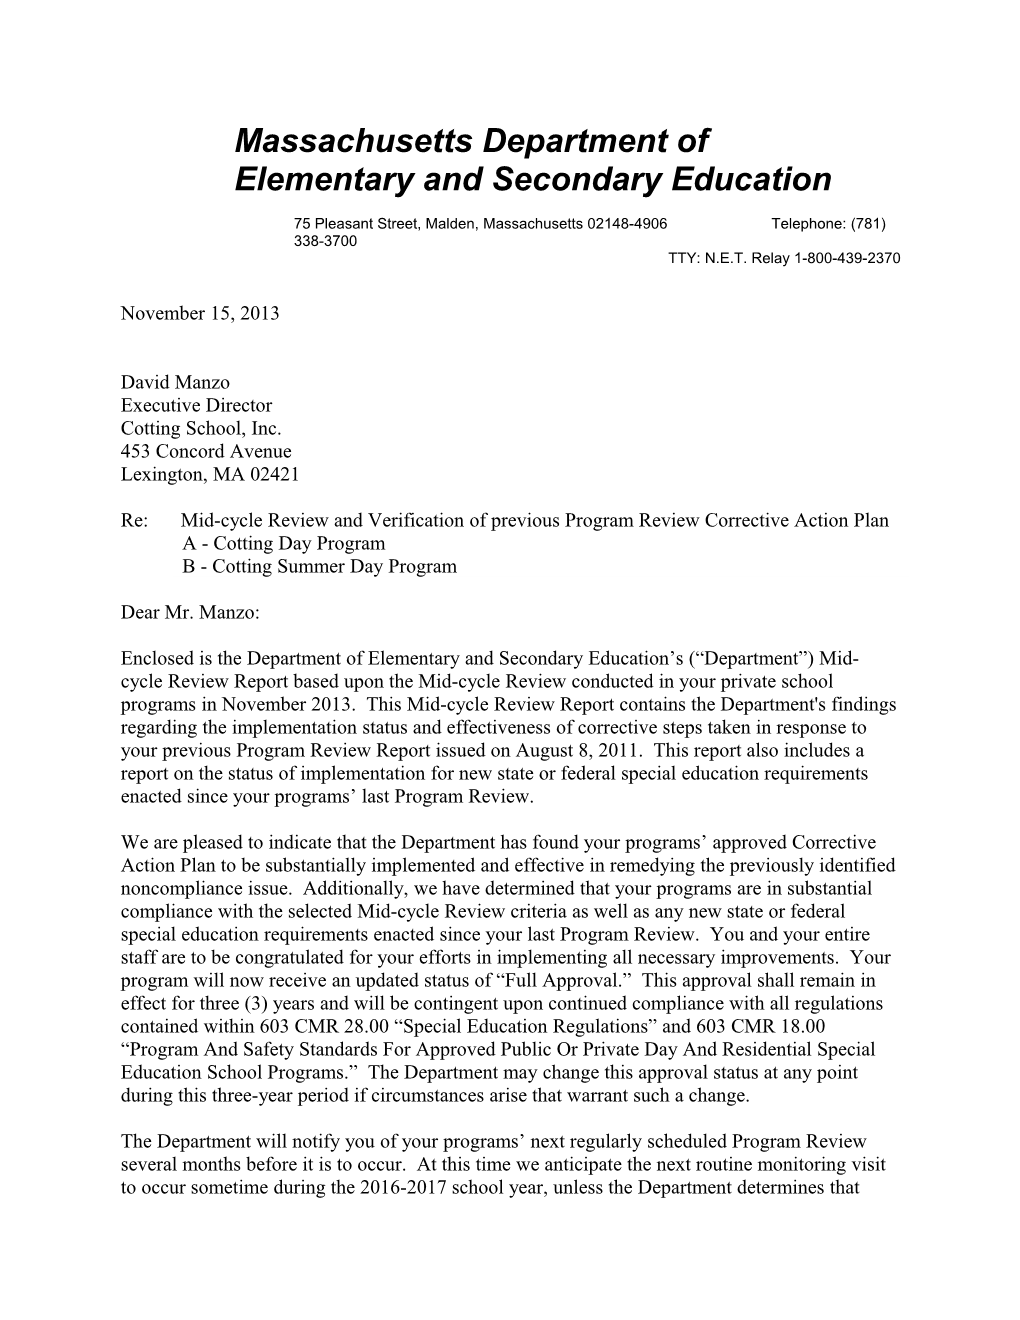 Cotting School, Inc. Mid-Cycle Report 2014